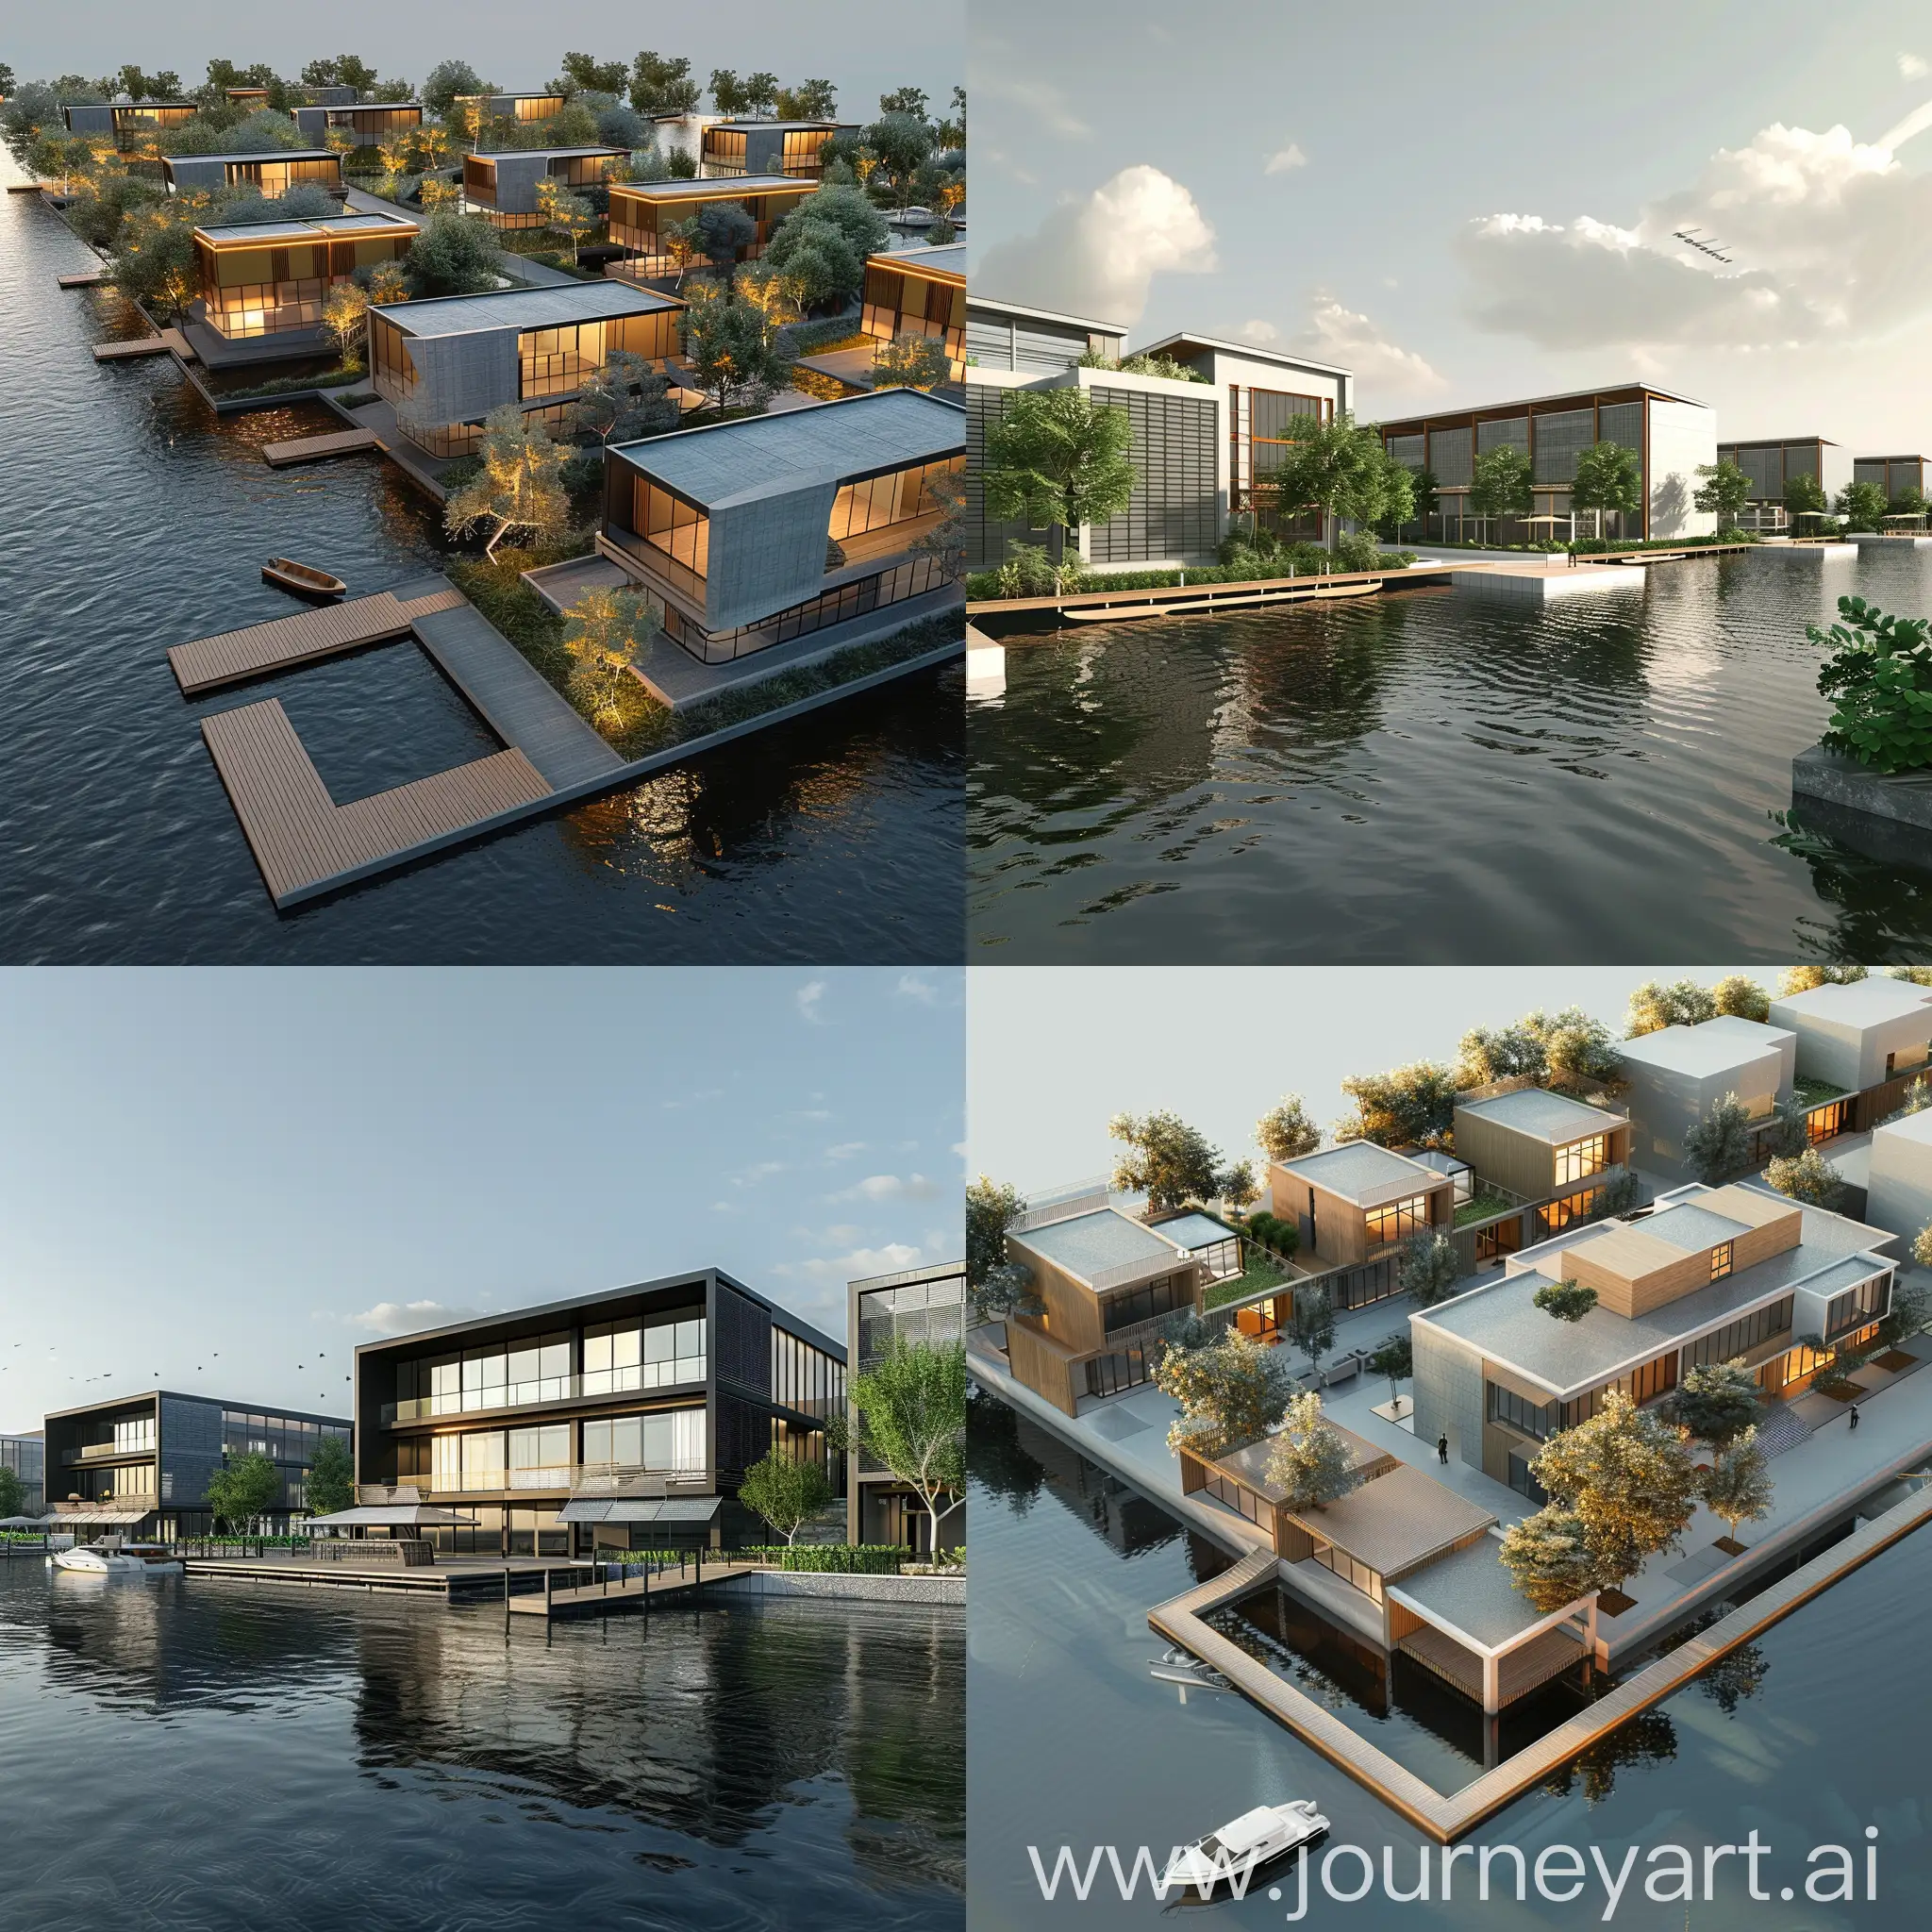 A 2d architecture section for a business park consists of 5 buildings with a Boat Dock